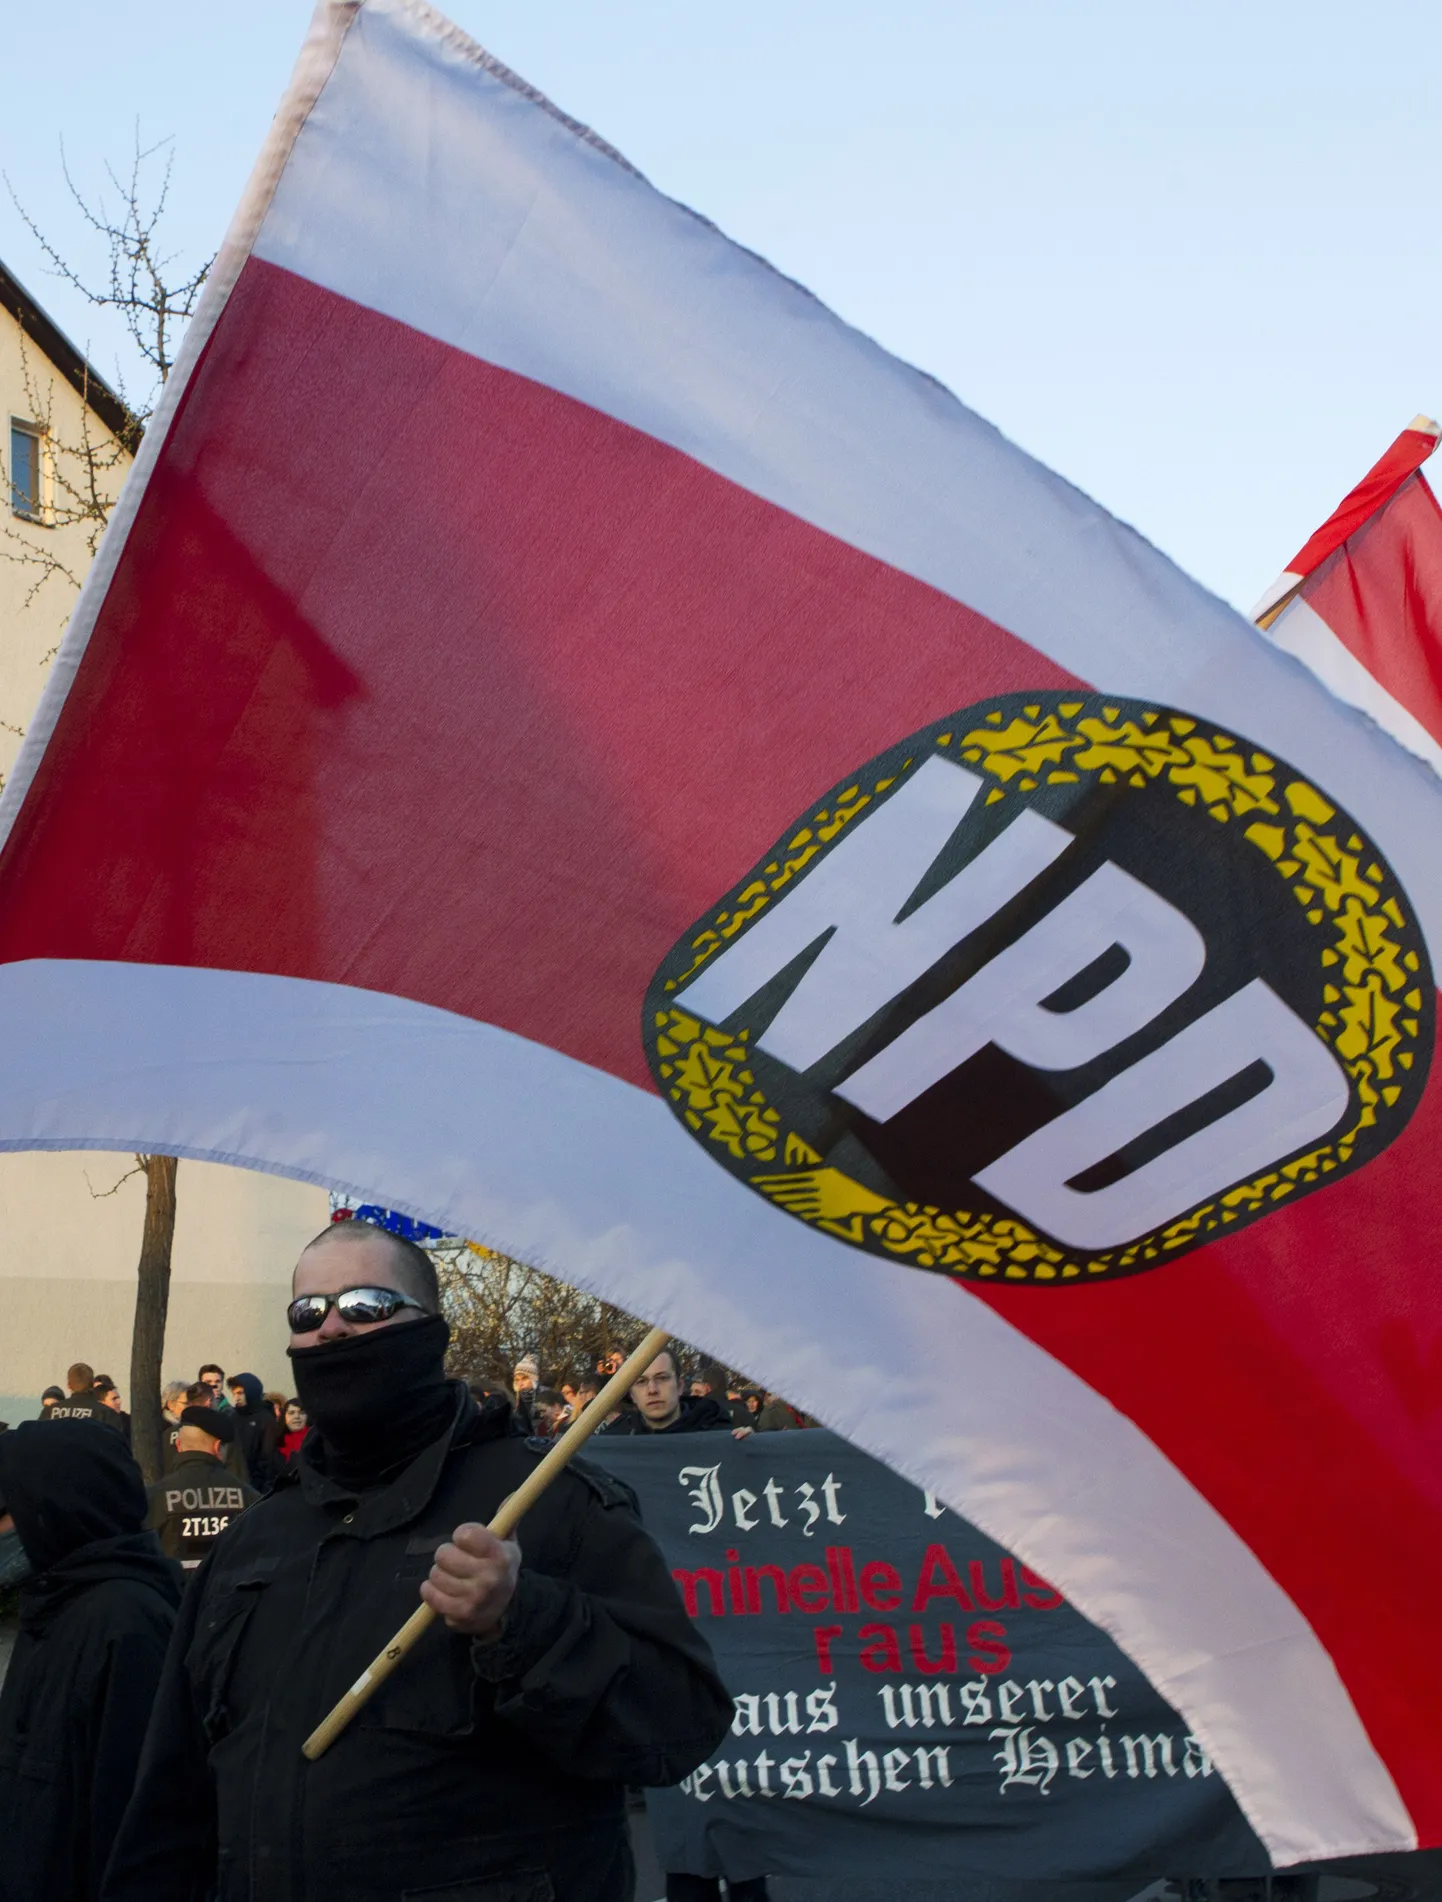 Supporters of the far-right nationalist National Democratic Party of Germany (NPD) march during a rally in Berlin April 13, 2012. Some 50 extreme-right supporters of the NPD marched on Friday through a Berlin suburb, demanding Germany dropped the Euro currency and calling for delinquent foreigners to be expelled.  REUTERS/Thomas Peter (GERMANY - Tags: CIVIL UNREST POLITICS BUSINESS)